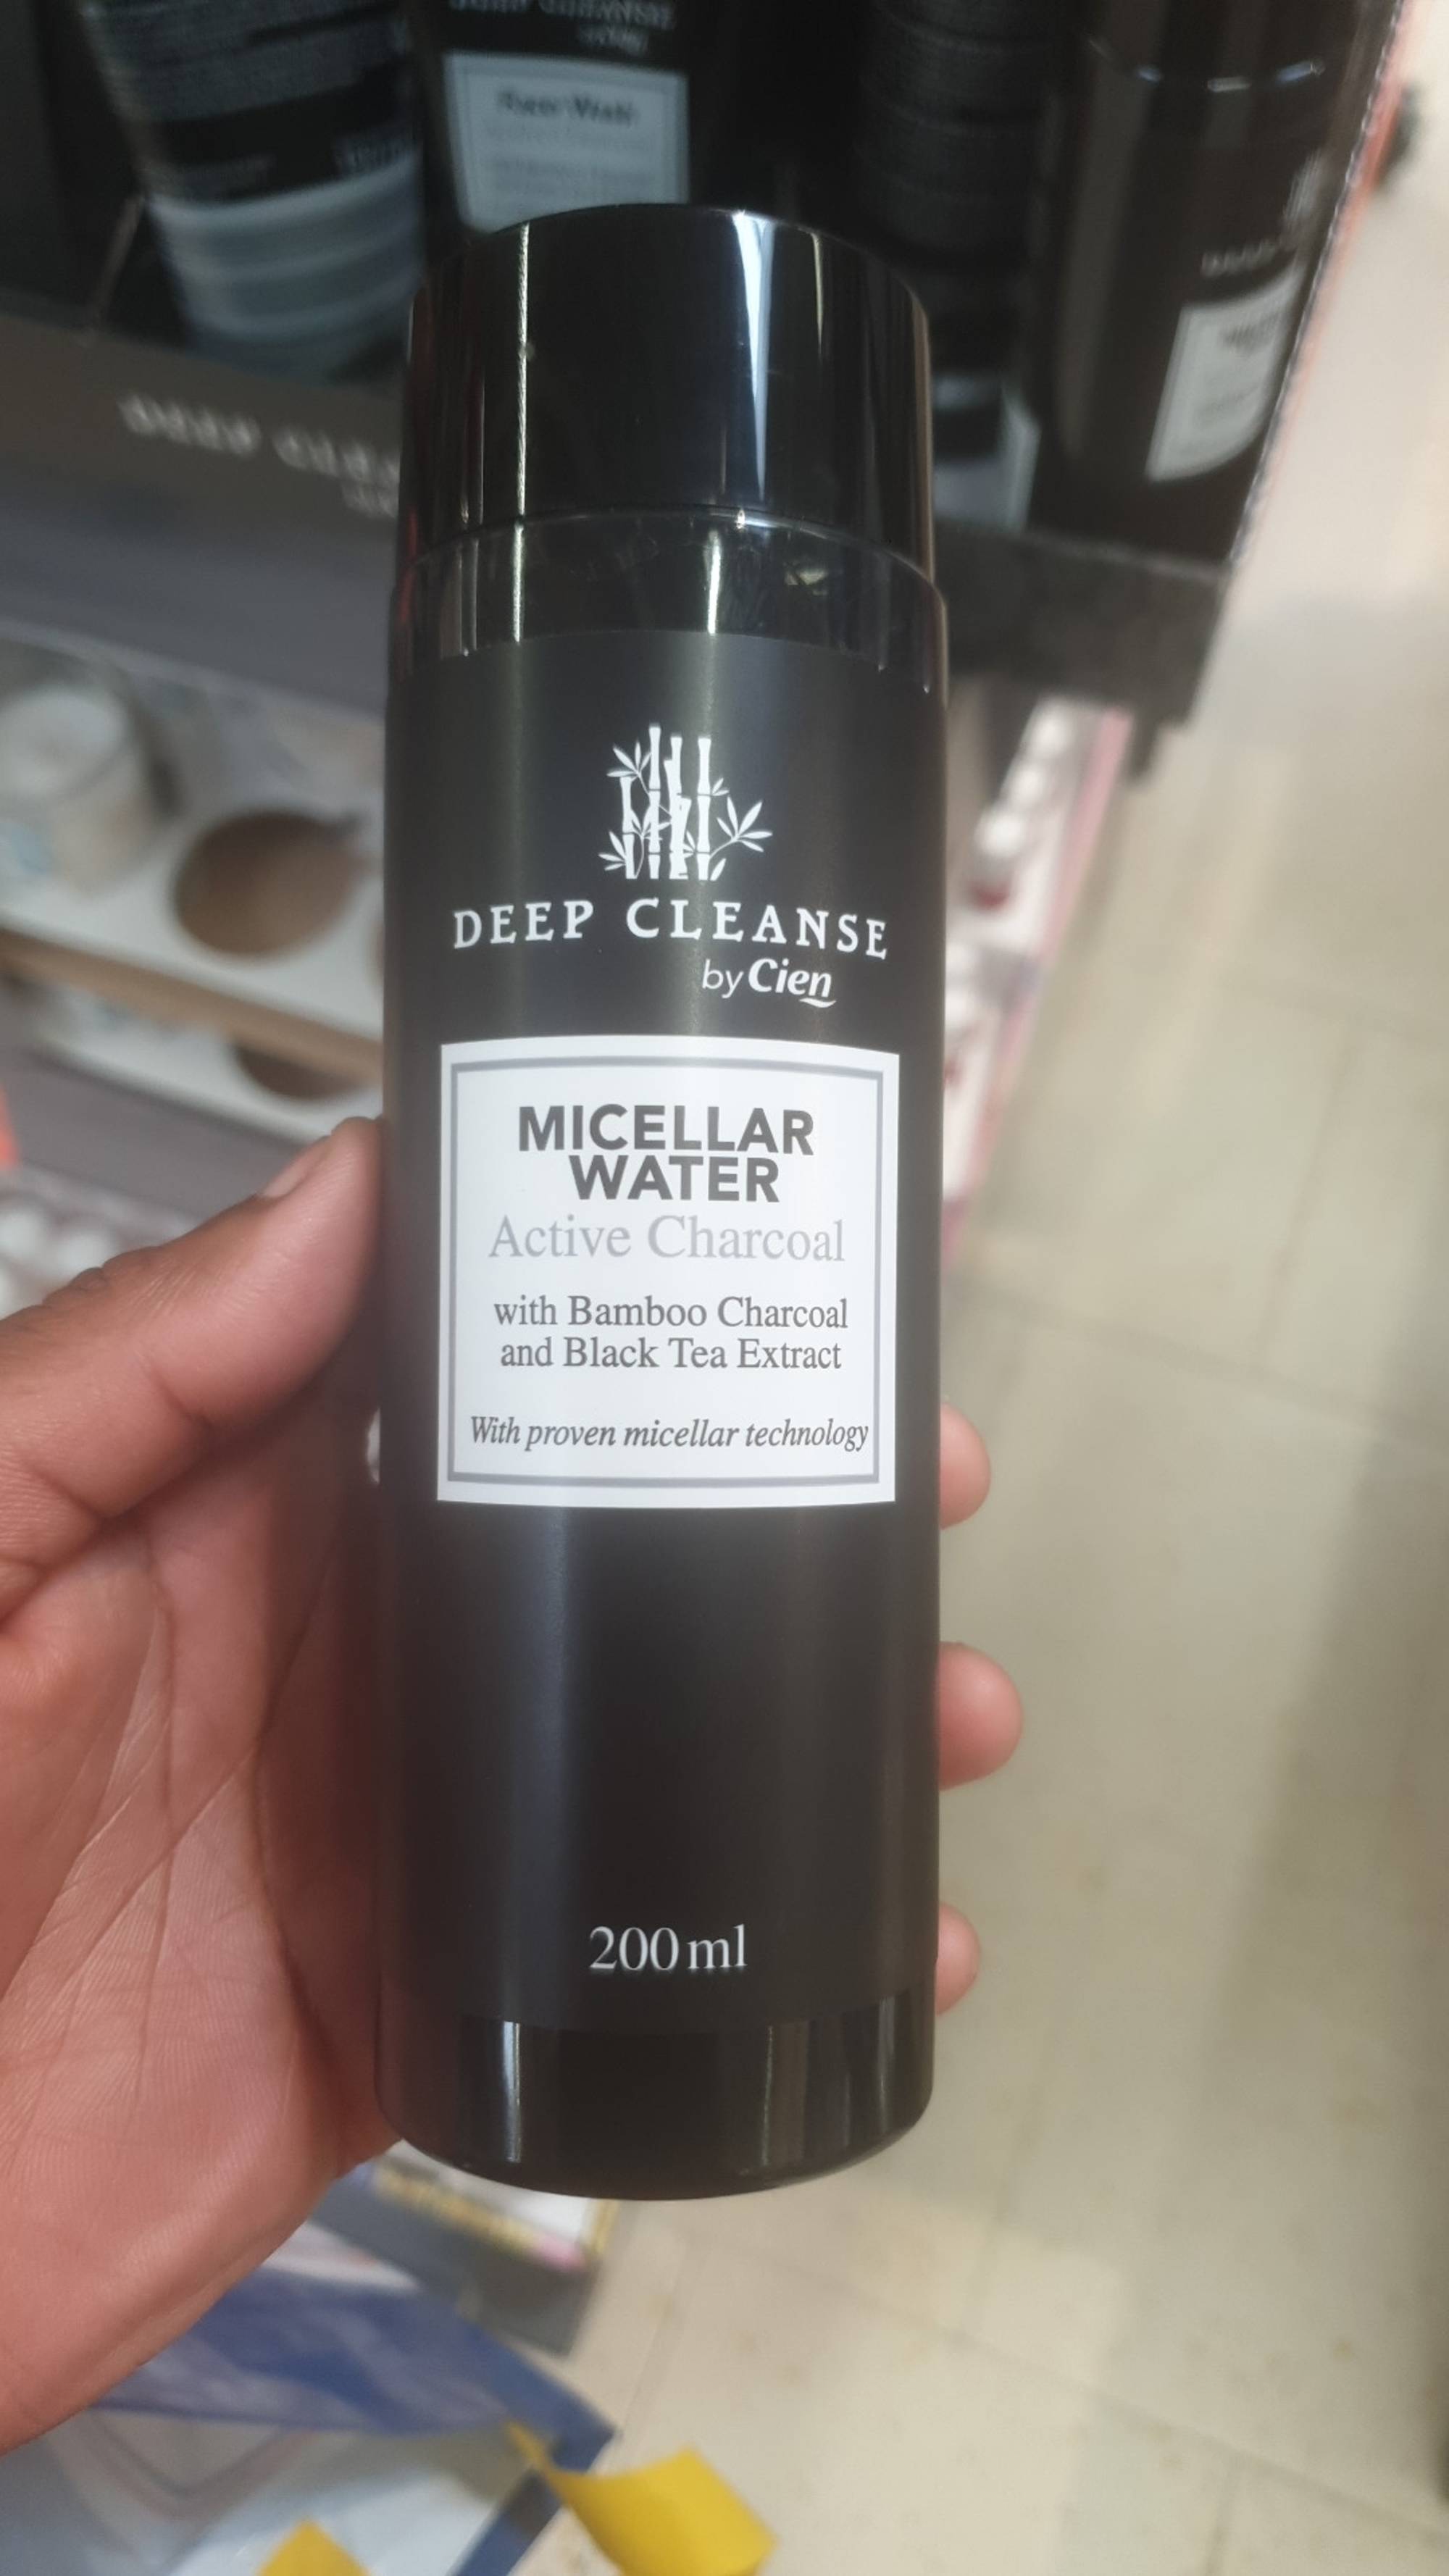 CIEN - Deep cleanse - Micellar water Active Charcoal